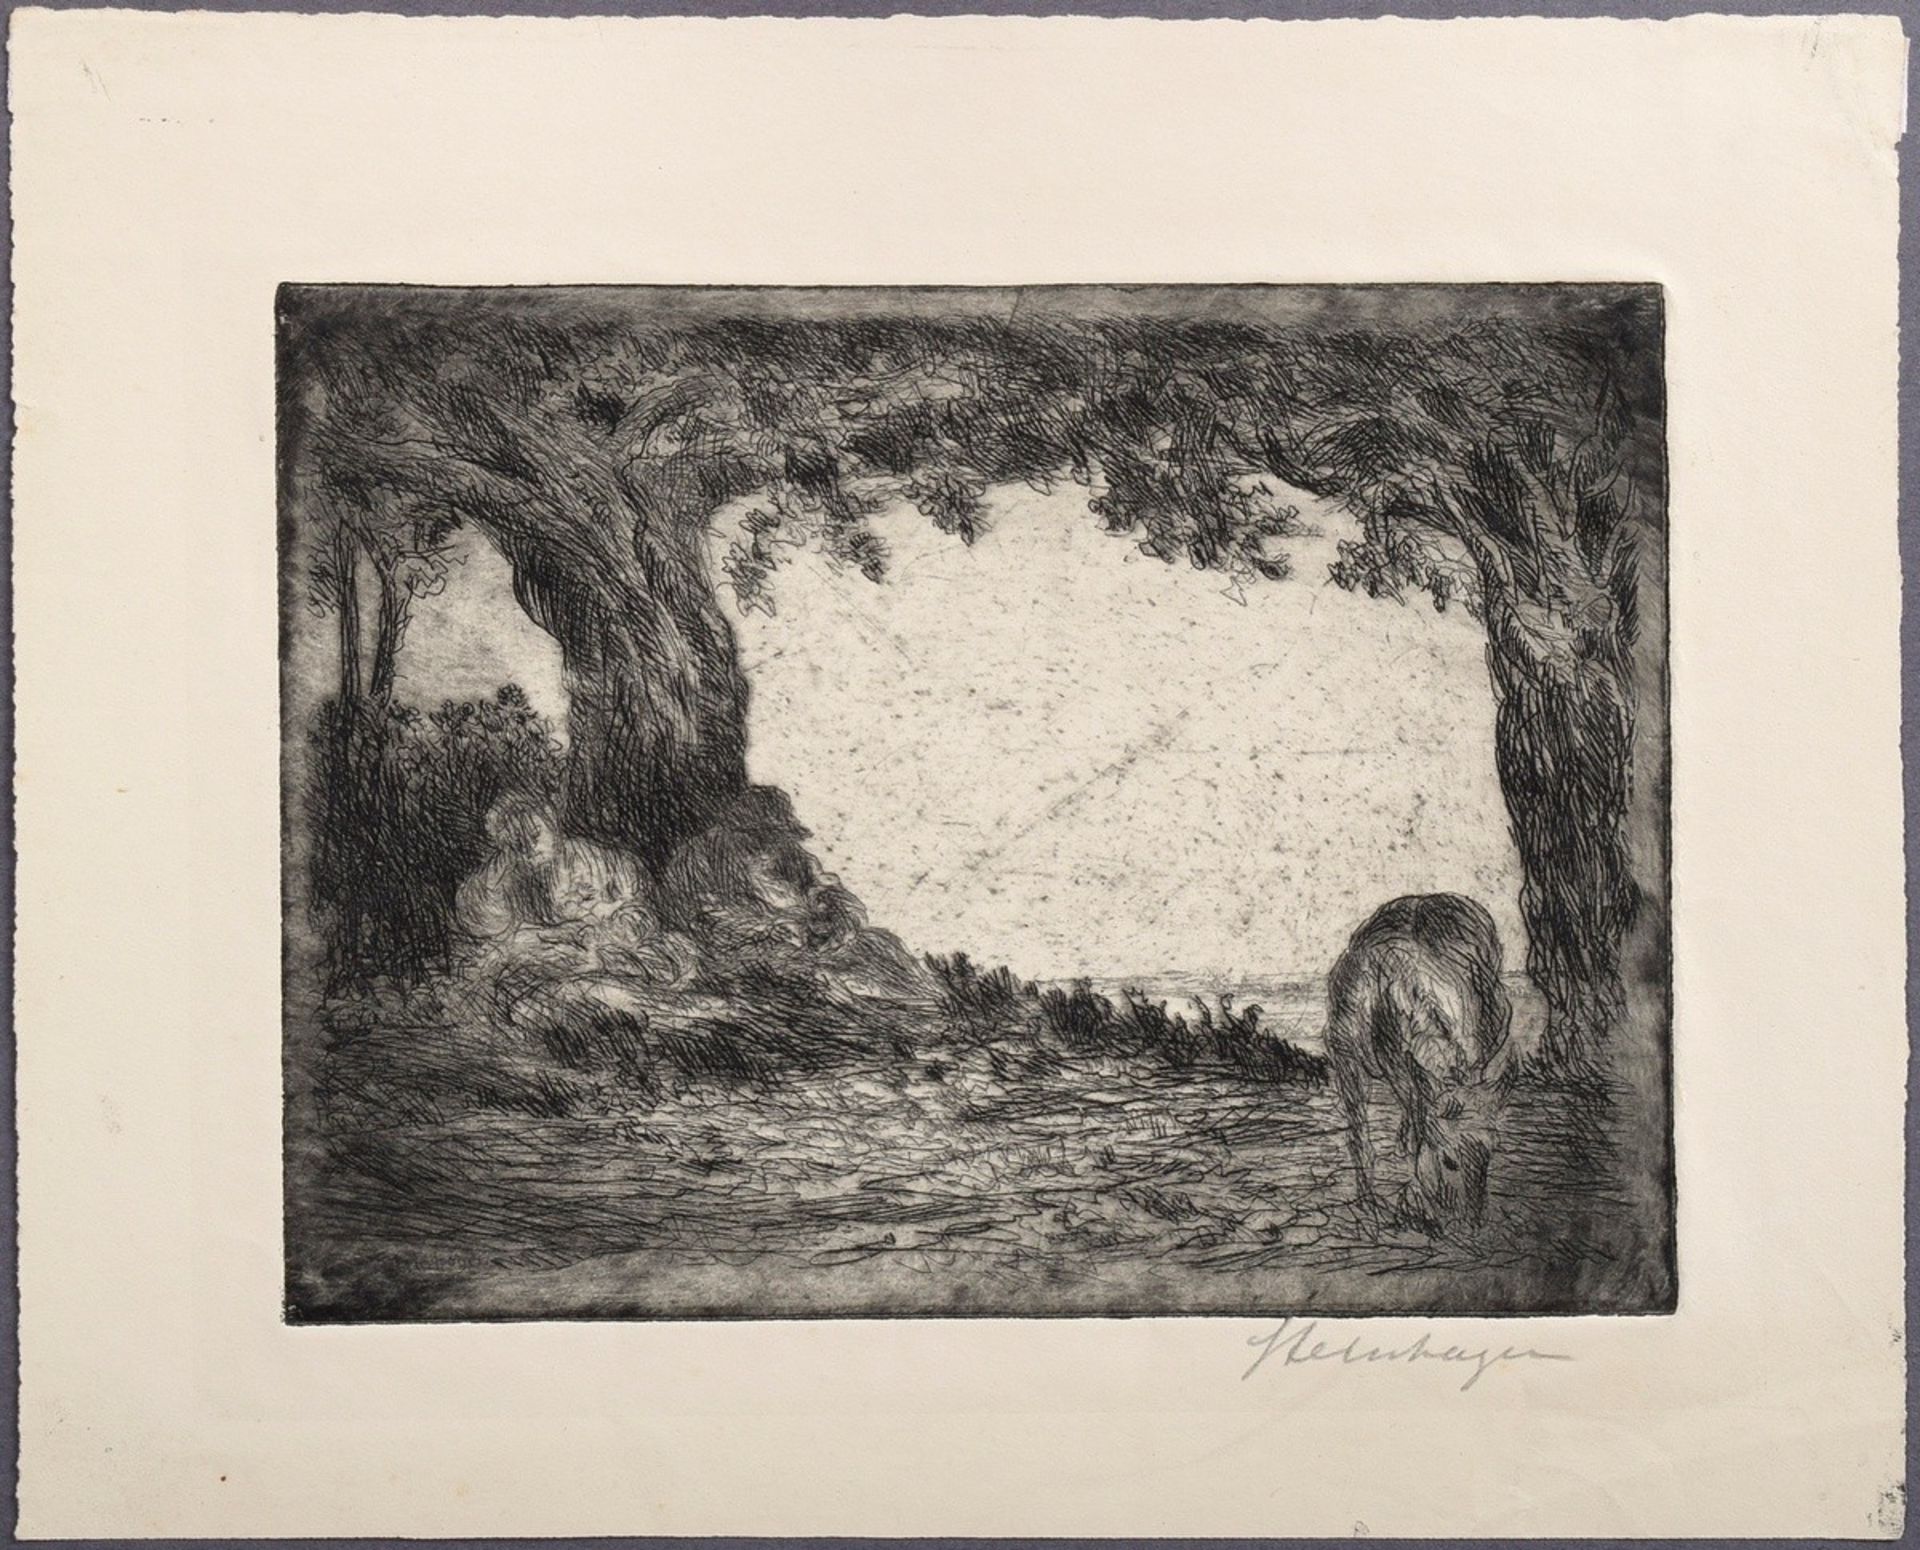 3 Steinhagen, Heinrich (1880-1948) "Christian Scenes", etchings, signed on the plate, 1x titled, si - Image 4 of 7